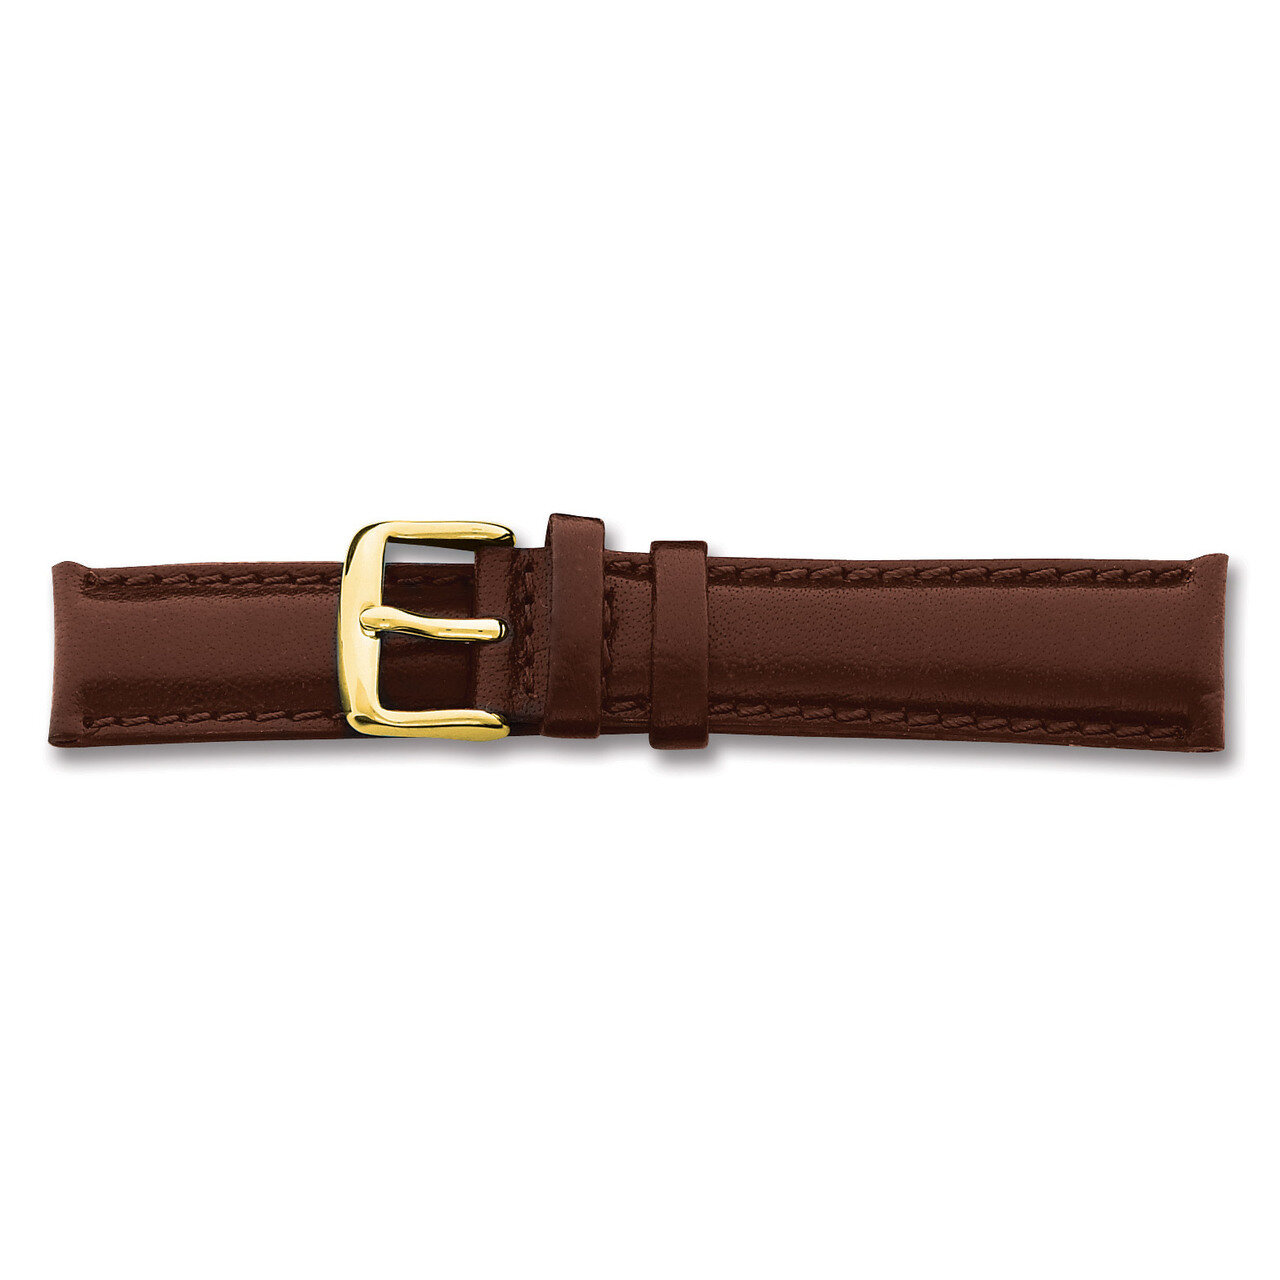 22mm Long Brown Leather Chrono Buckle Watch Band 8.5 Inch Gold-tone BAY140L-22